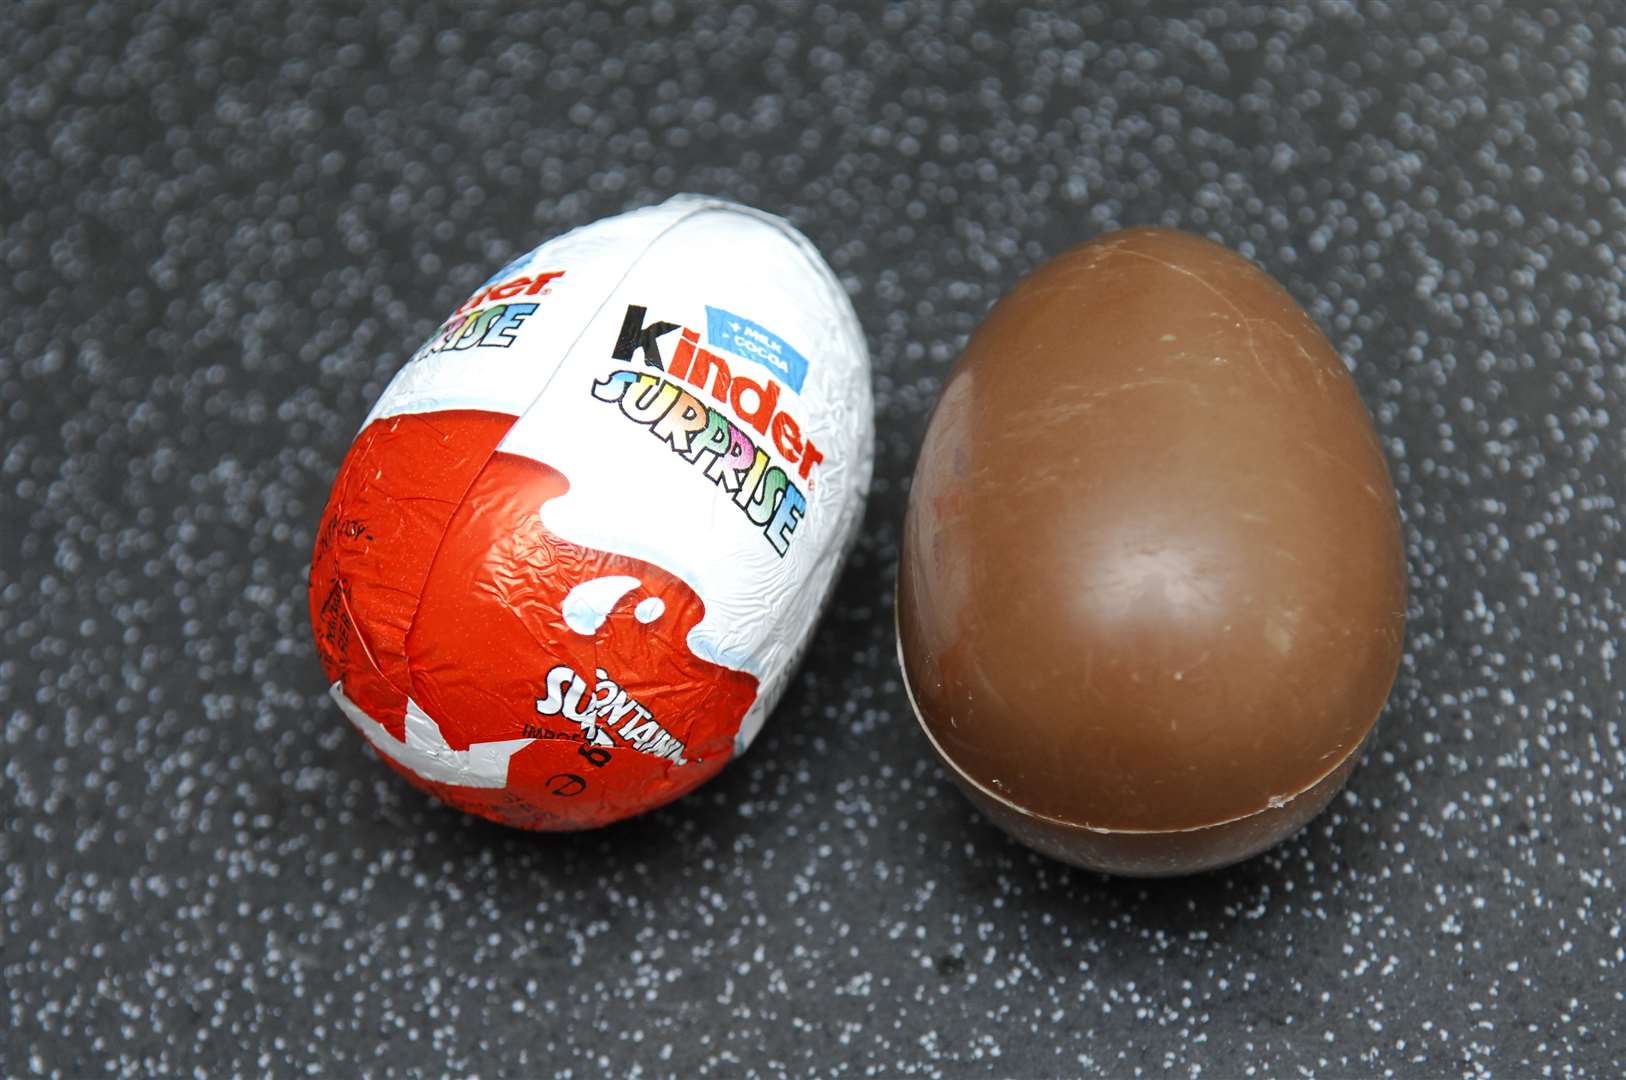 The list of Kinder products being recalled has been extended